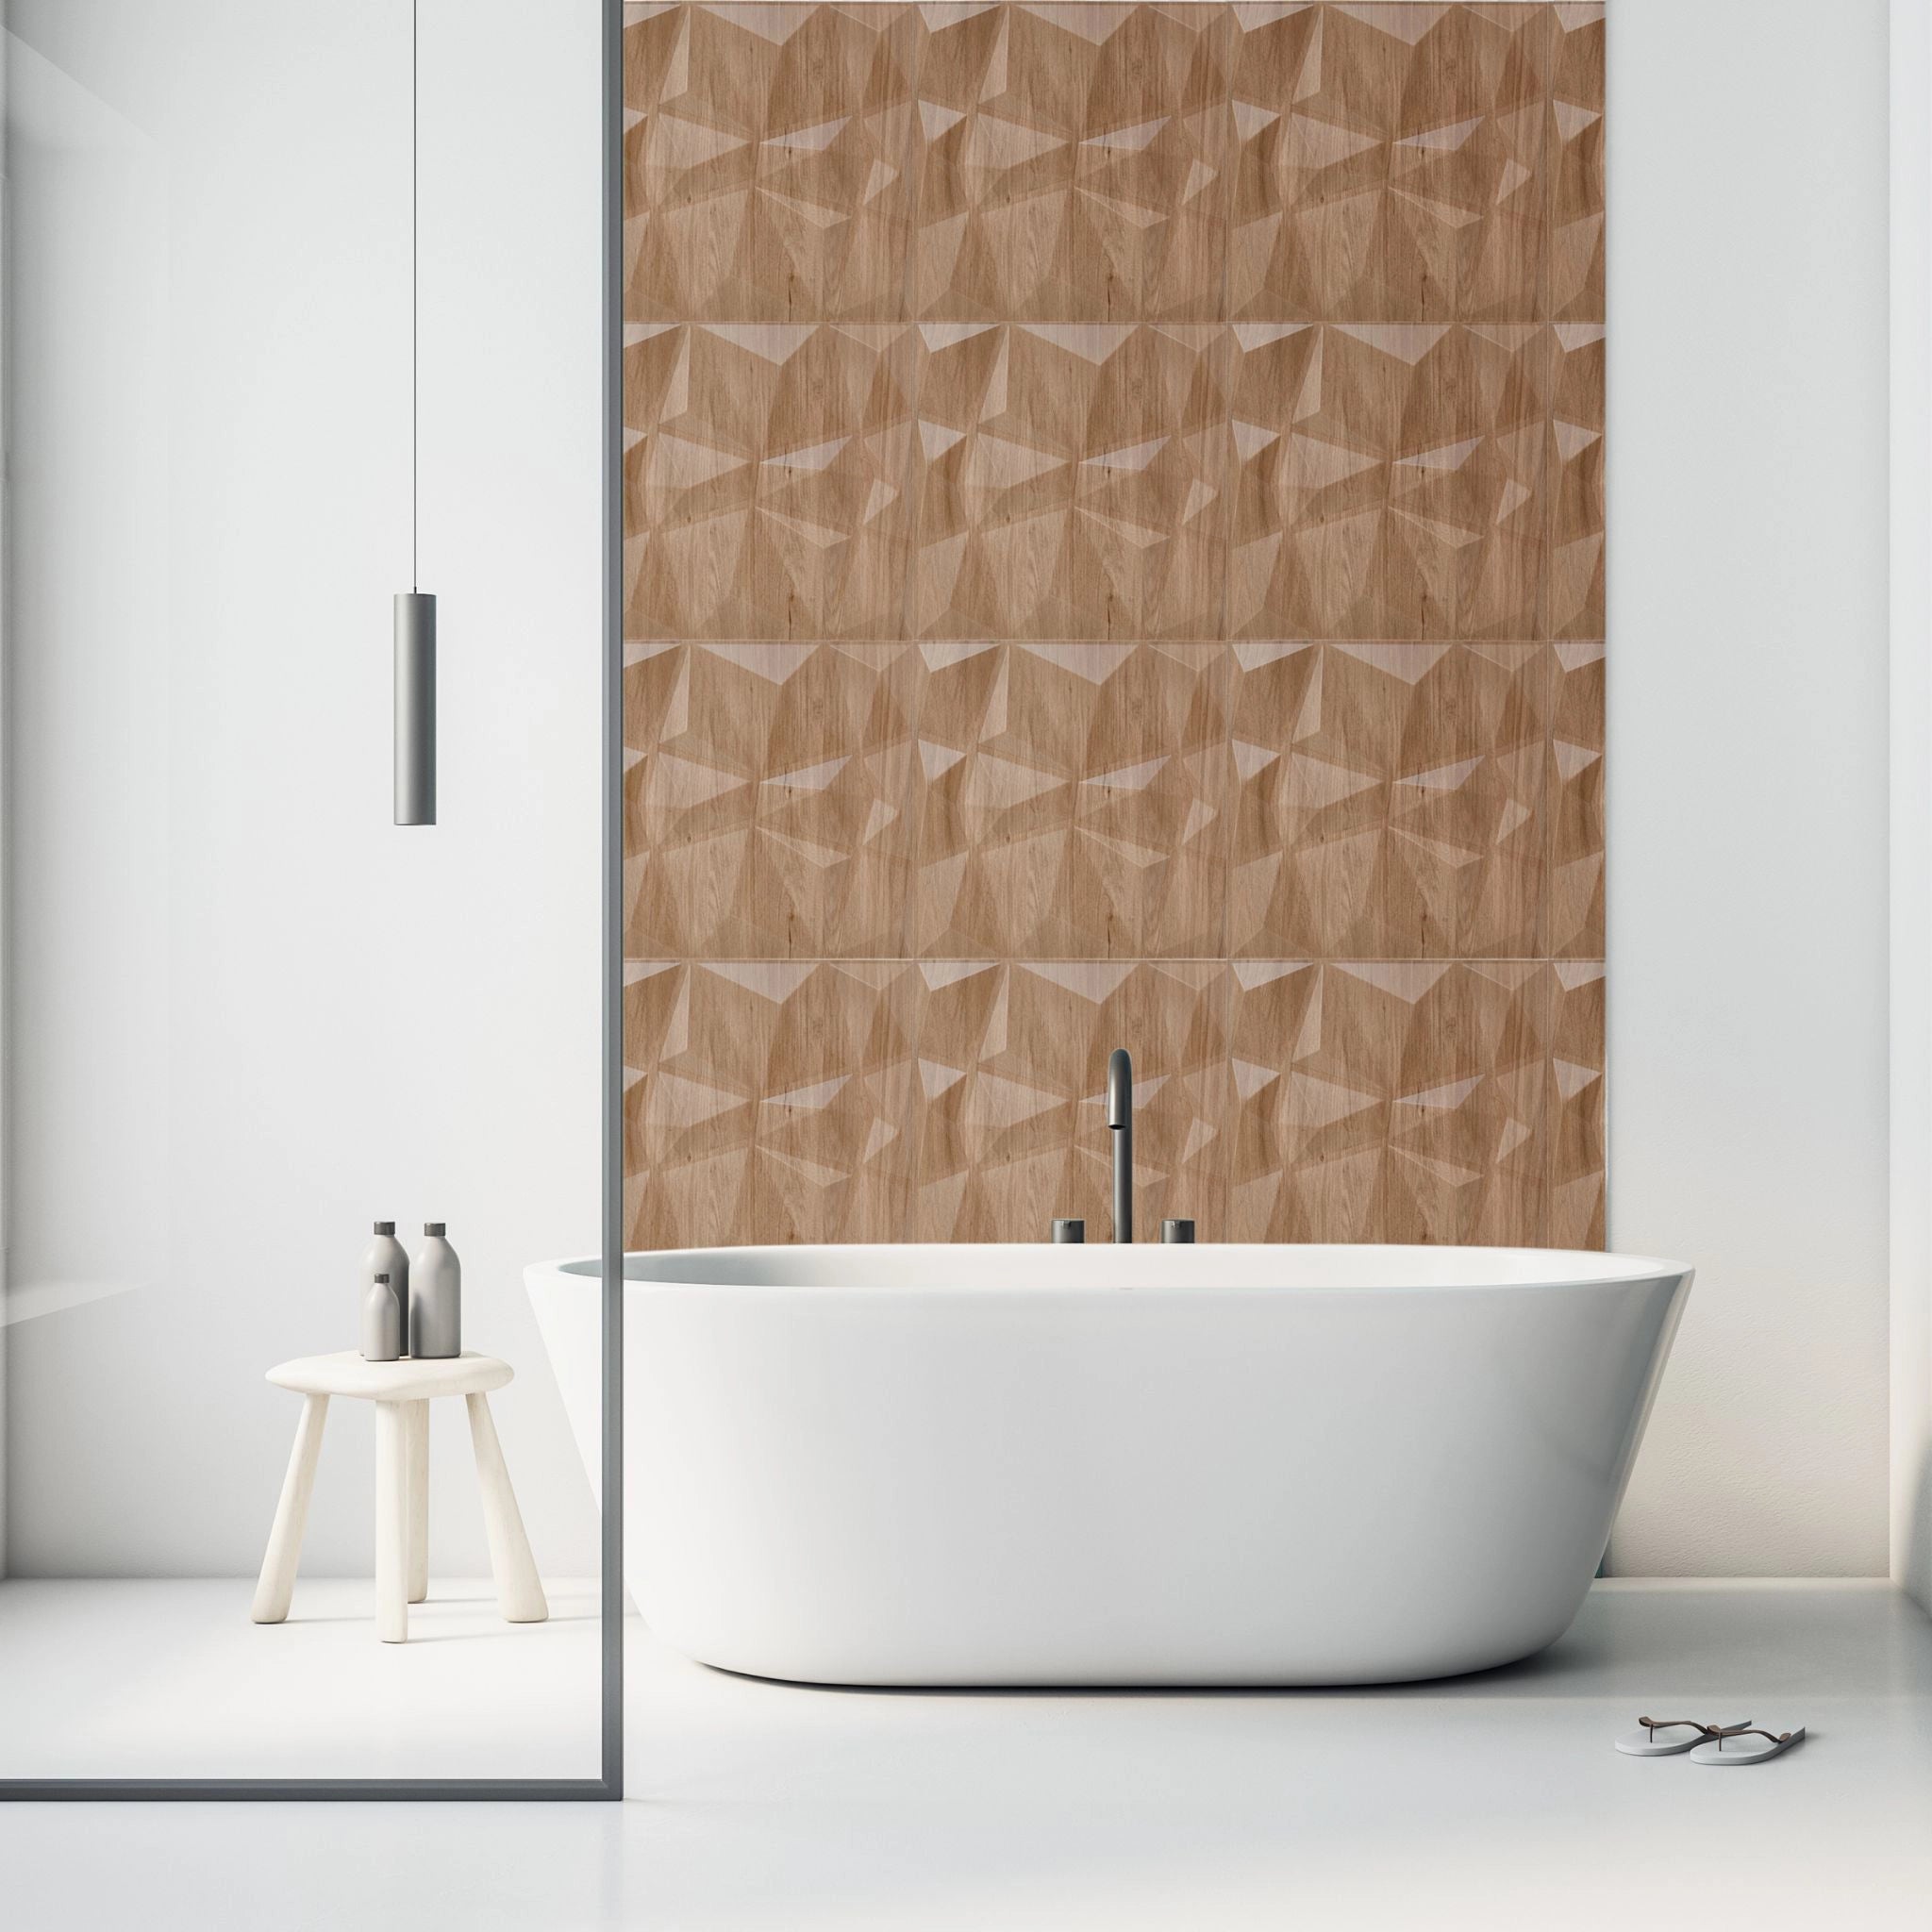 Wooden PVC wall panel with geometric design in stylish Bathroom room